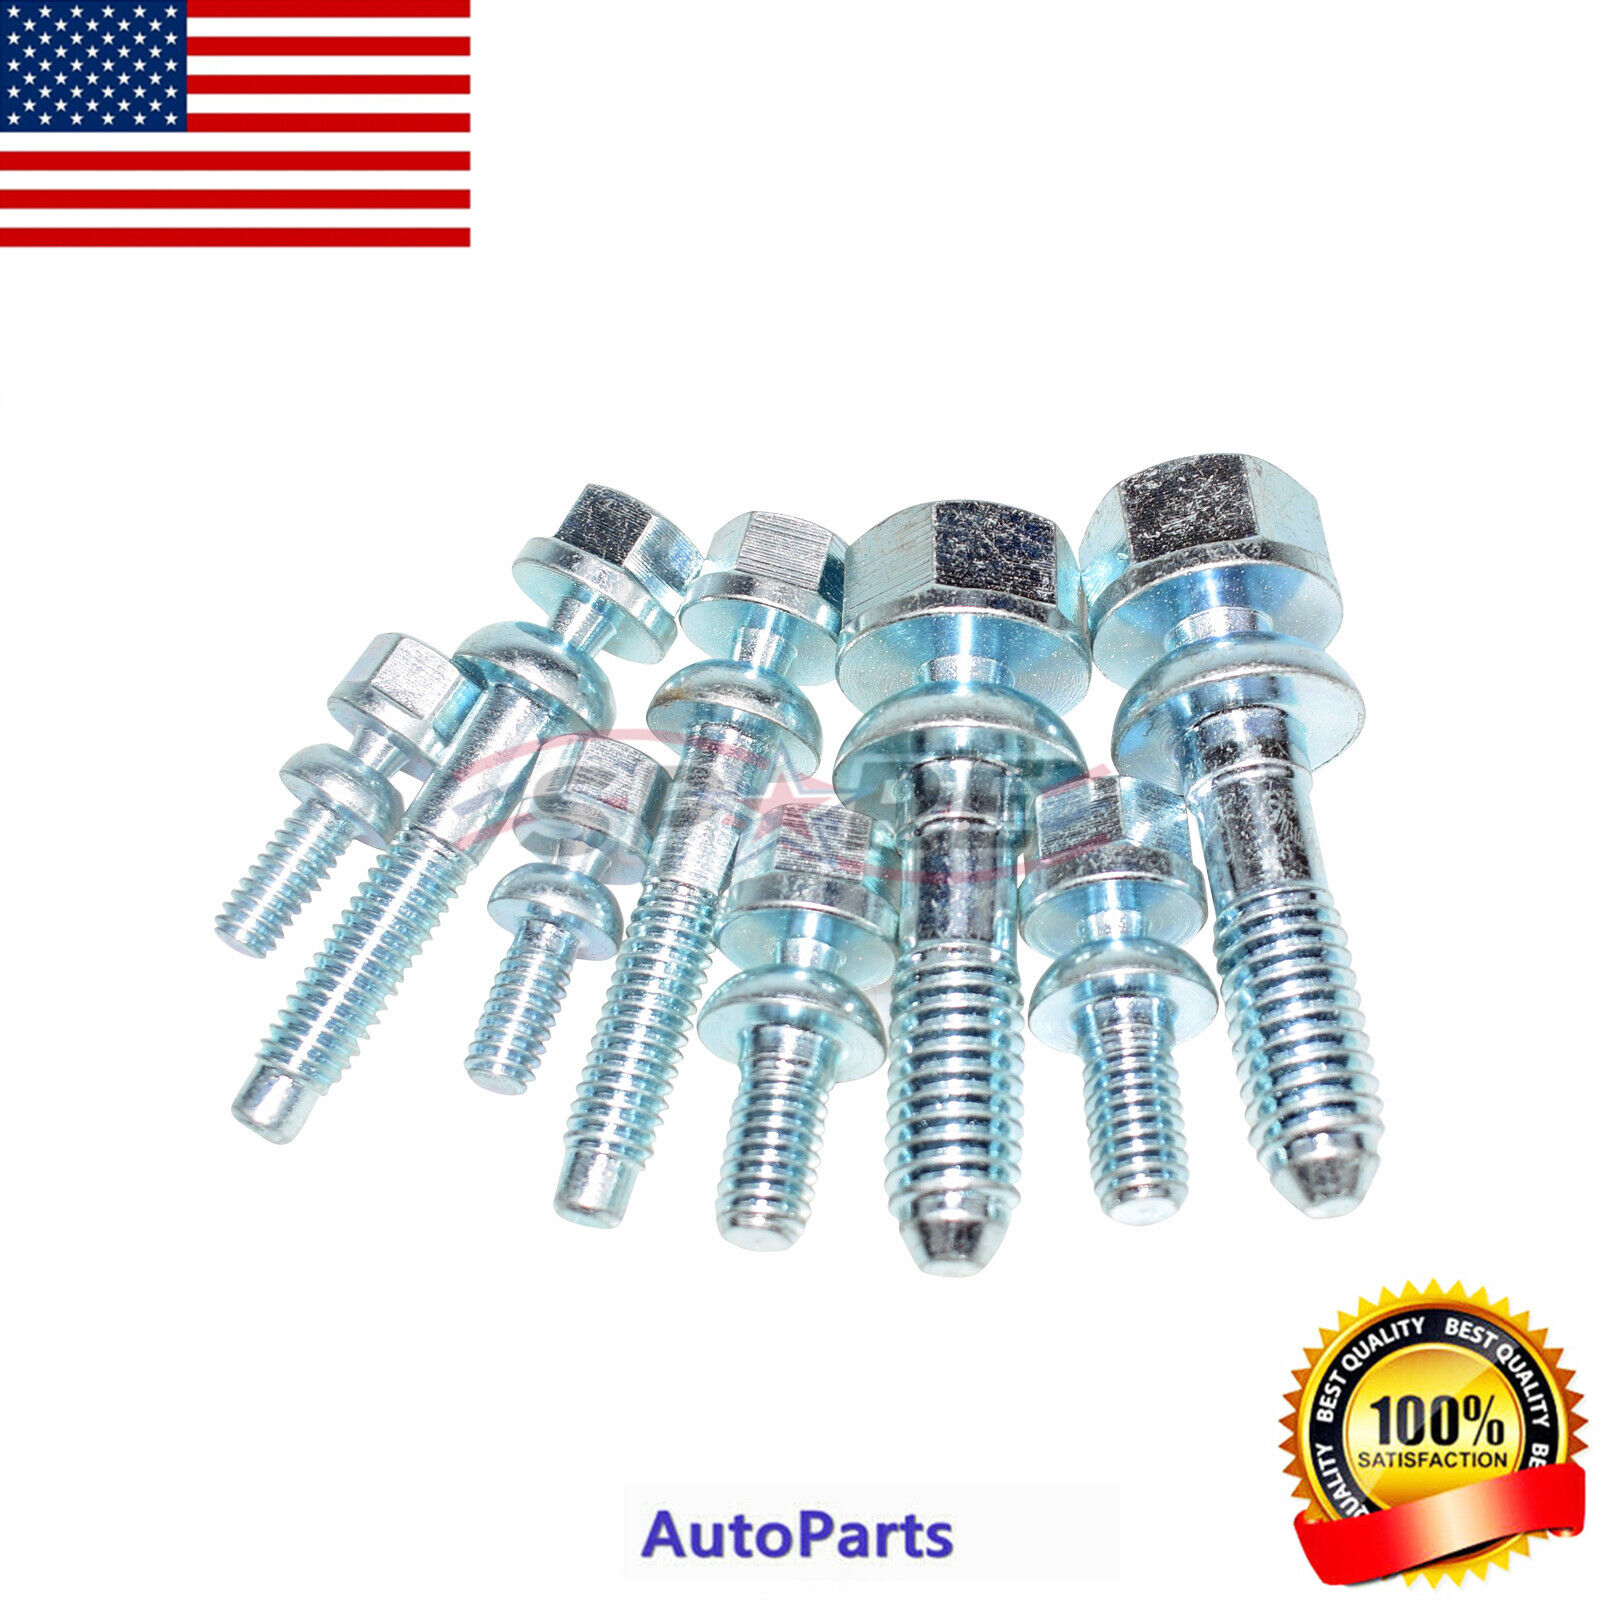 Break Off Seal Bolts Compatible With Ct350 Gm 602 Crate Race Motor Engine